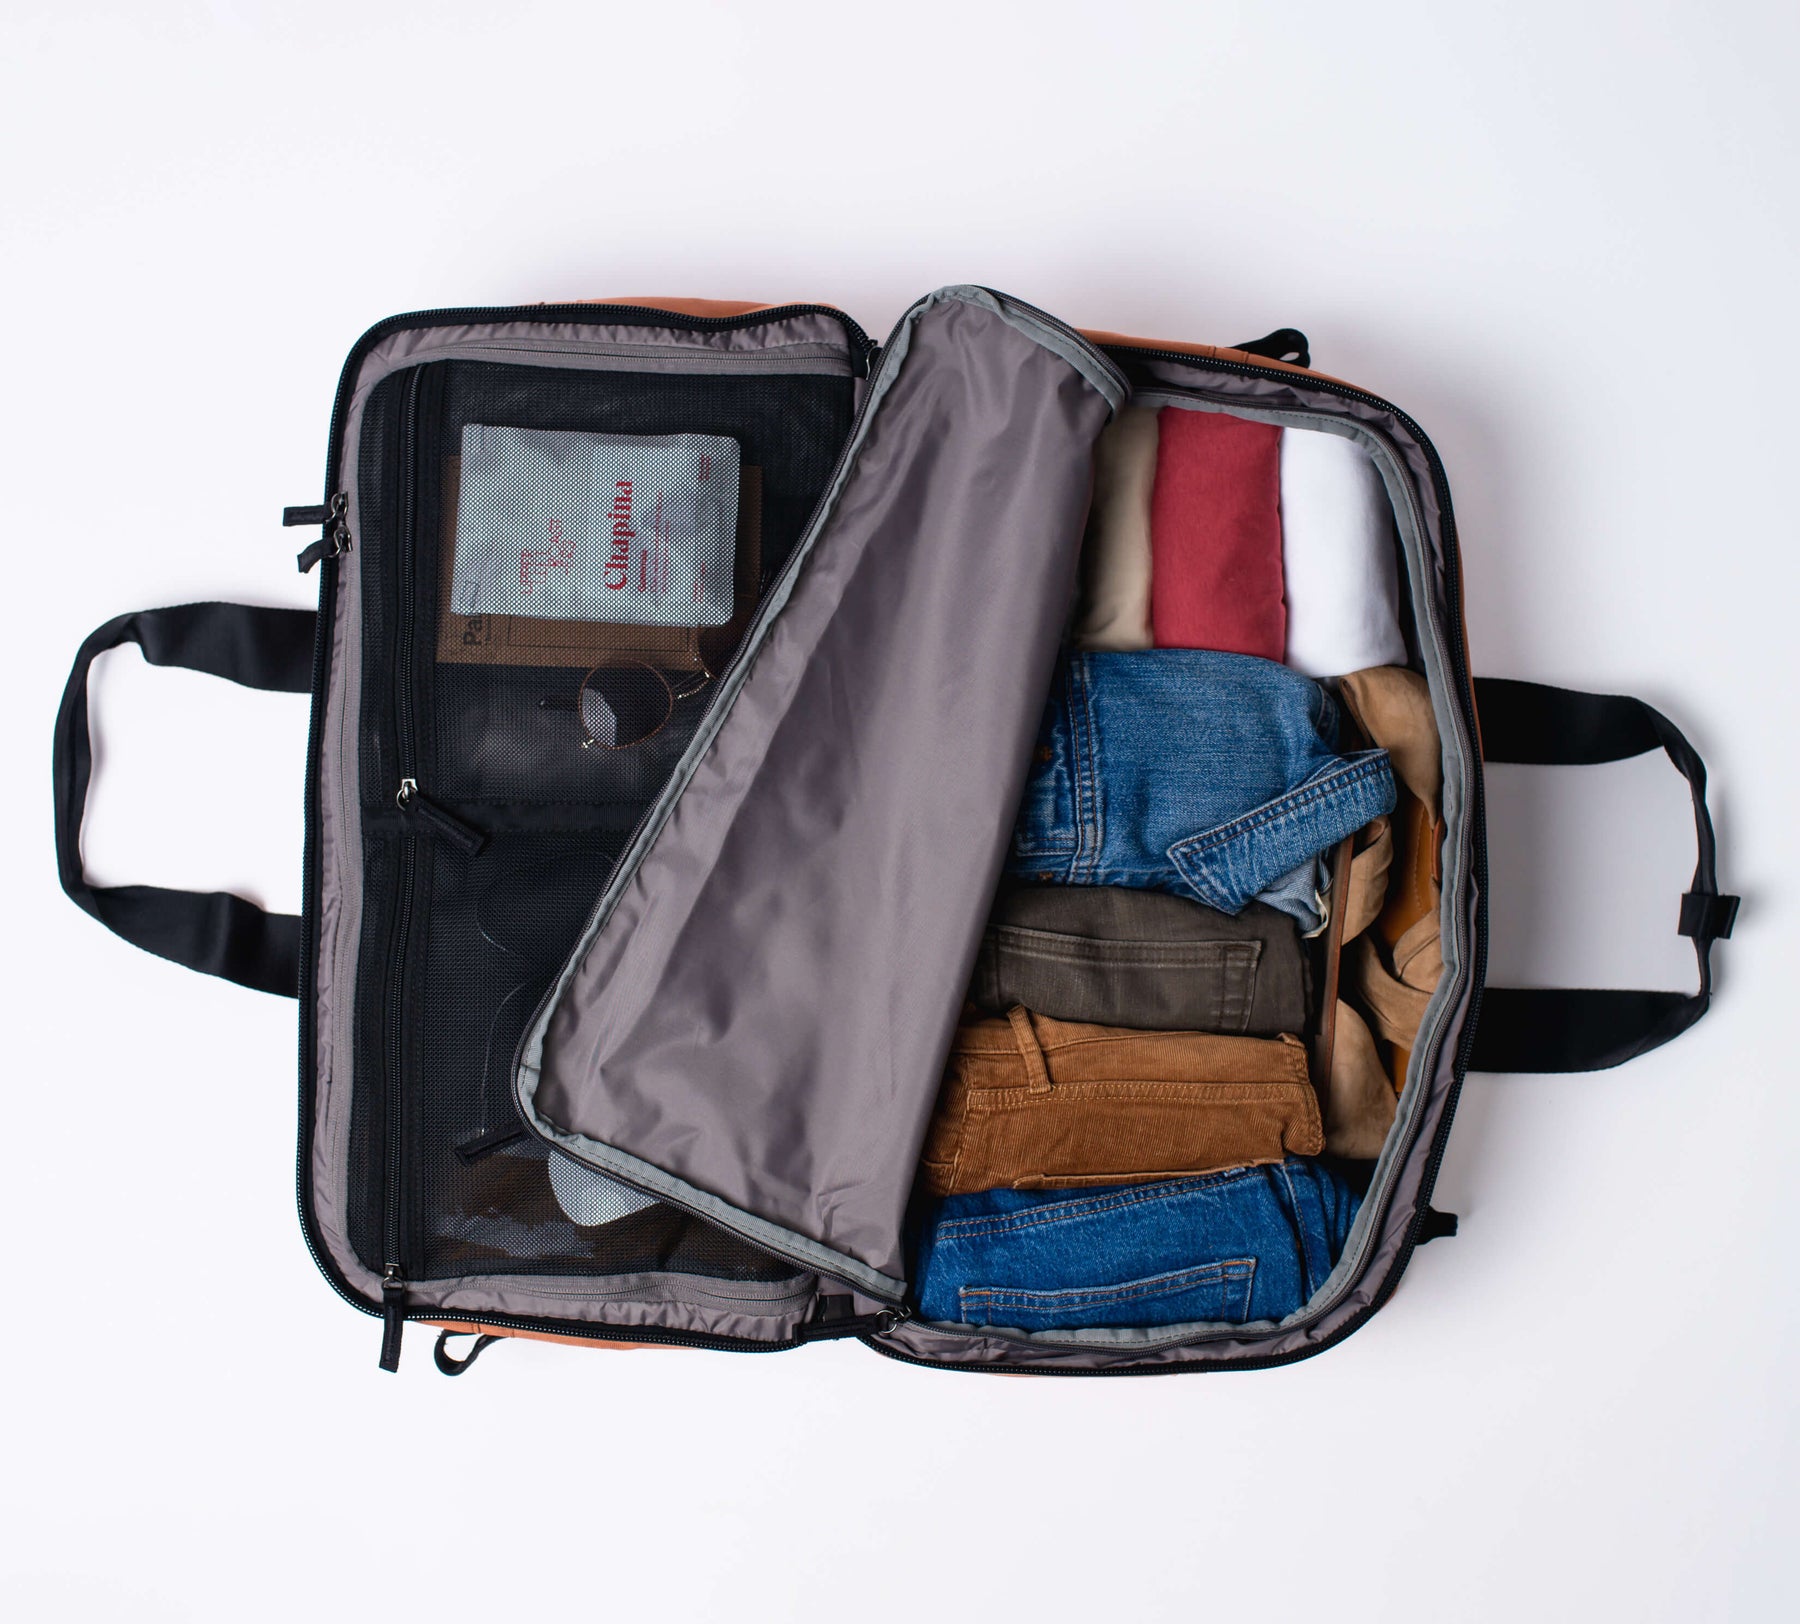 pack clothes into one half of the large interior compartments